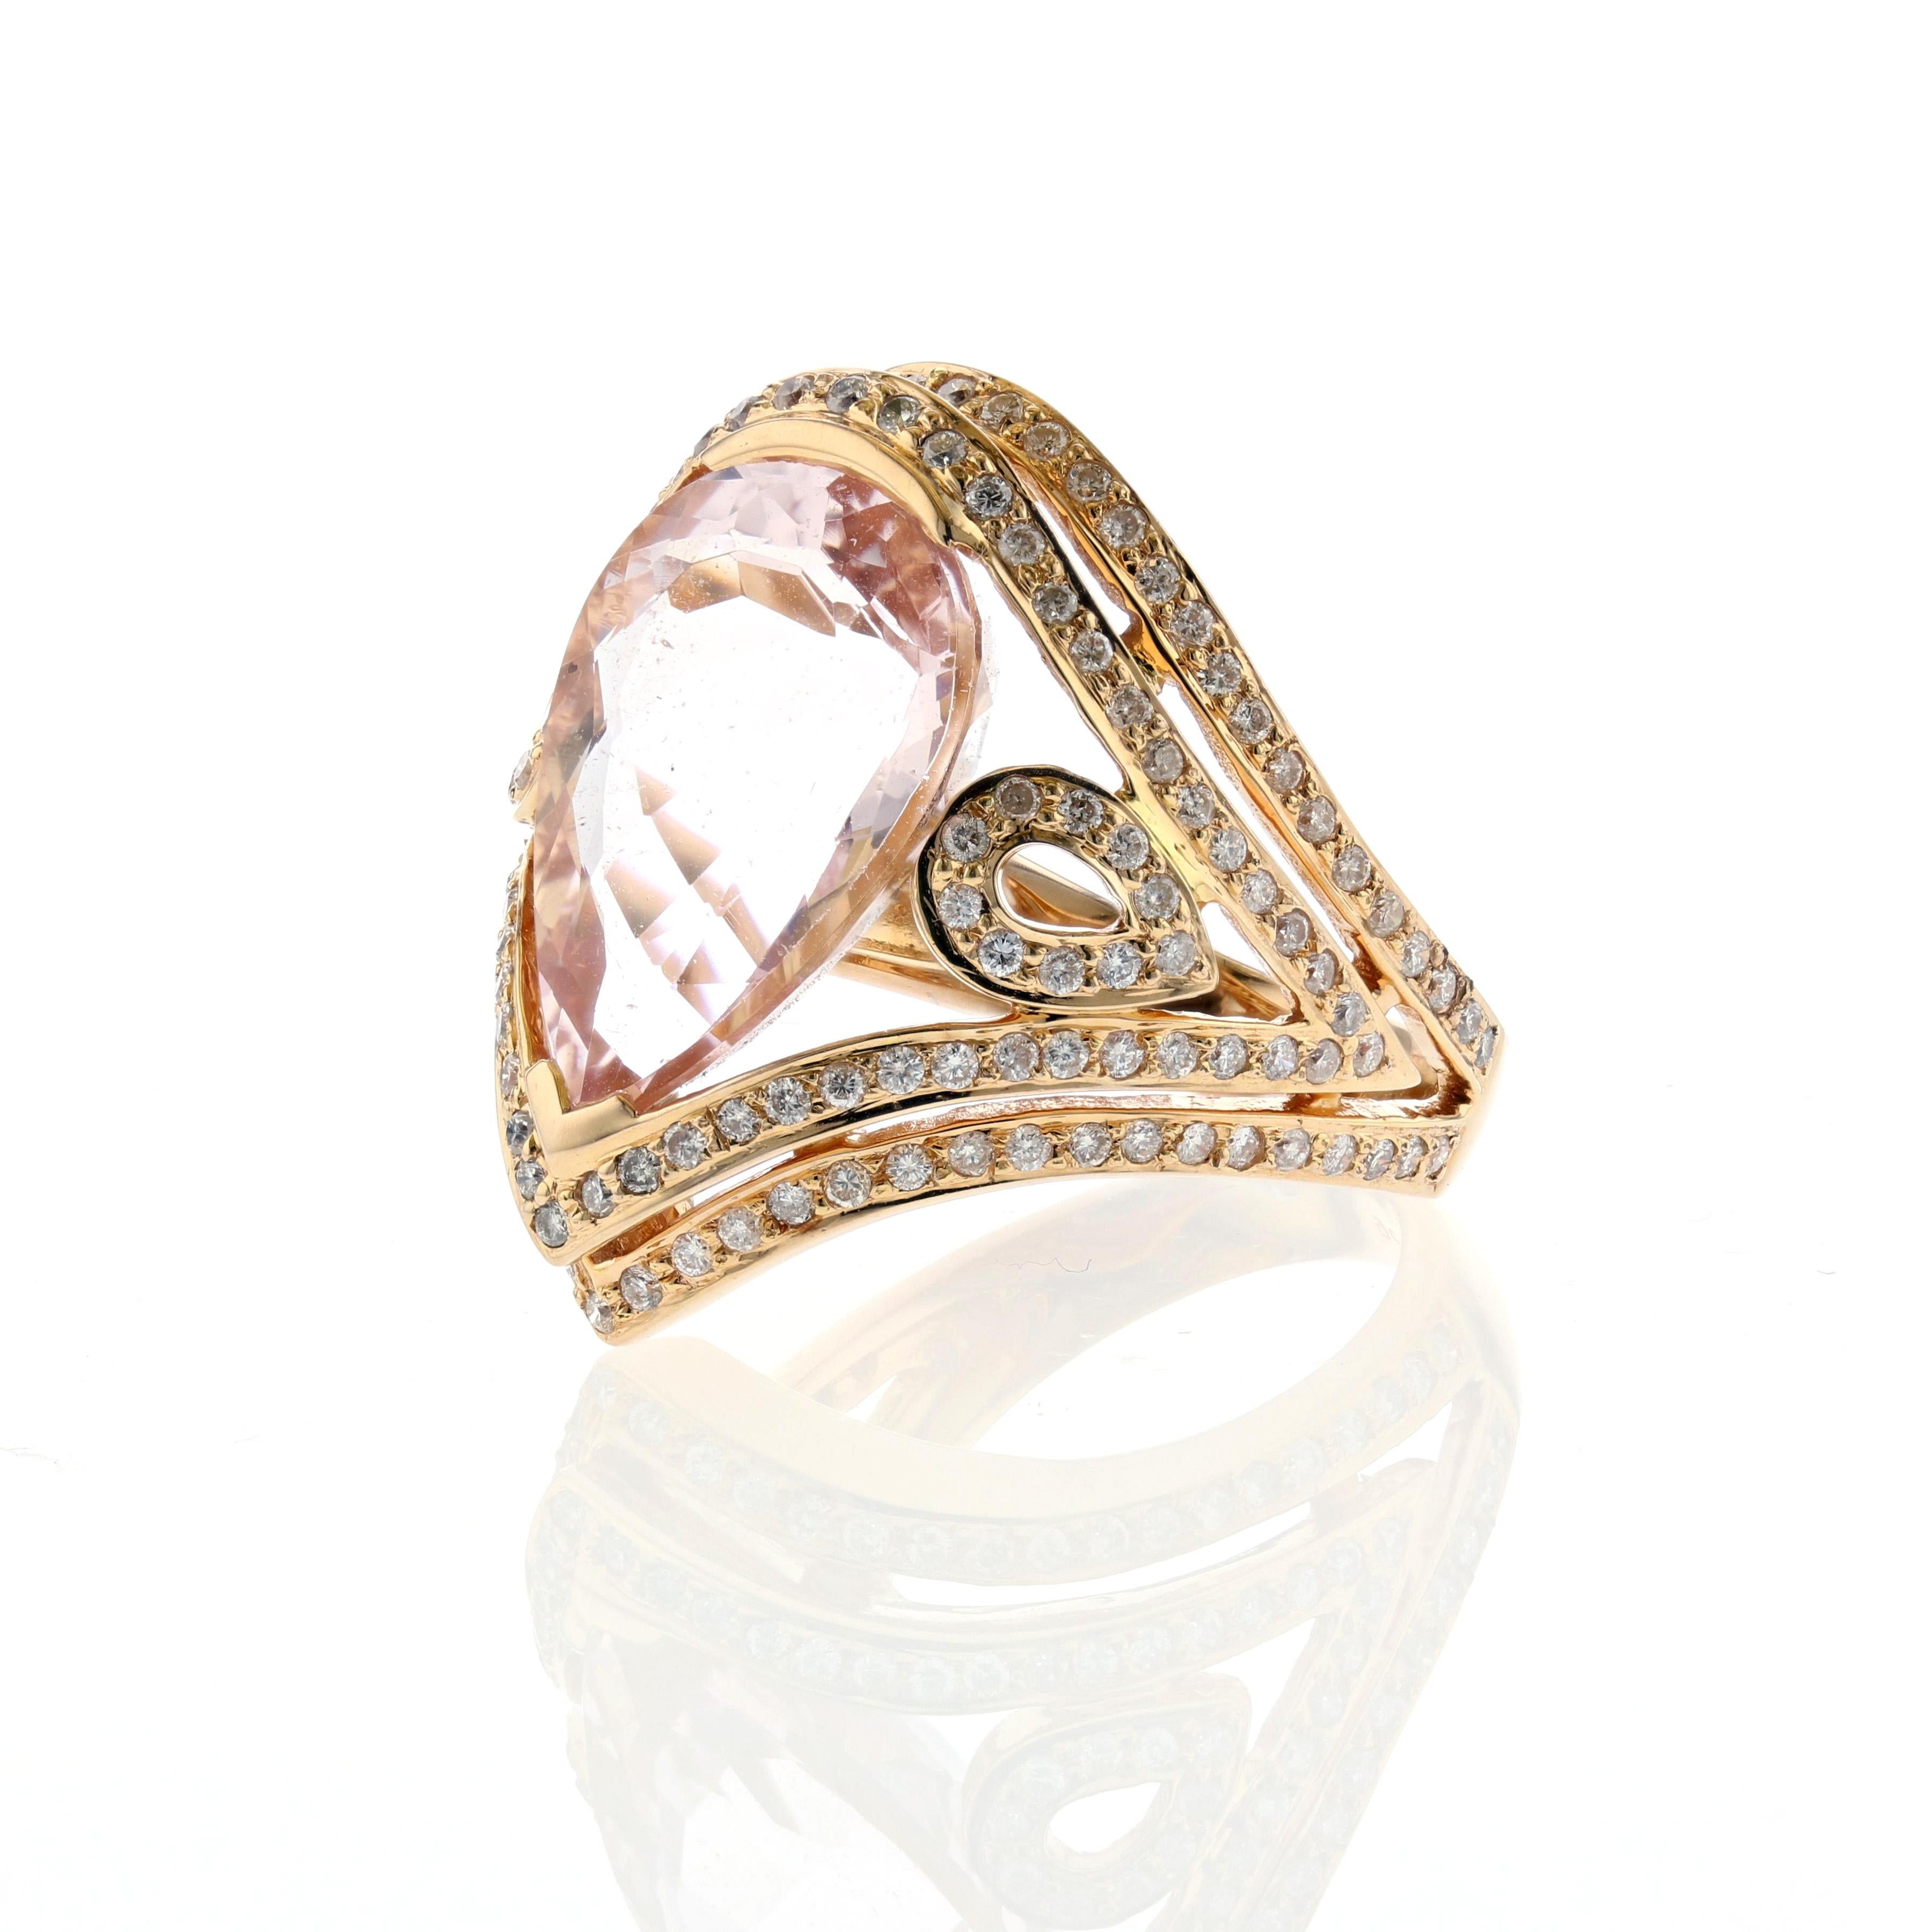 18K rose gold ring featuring one pear-shaped morganite that totals 8.30 carats.  Additionally, there are 149 round diamonds that total 0.90 carats; G-H color and VS clarity.  The ring is currently a size 7.  It measures 1 inch wide and 7/8 inches